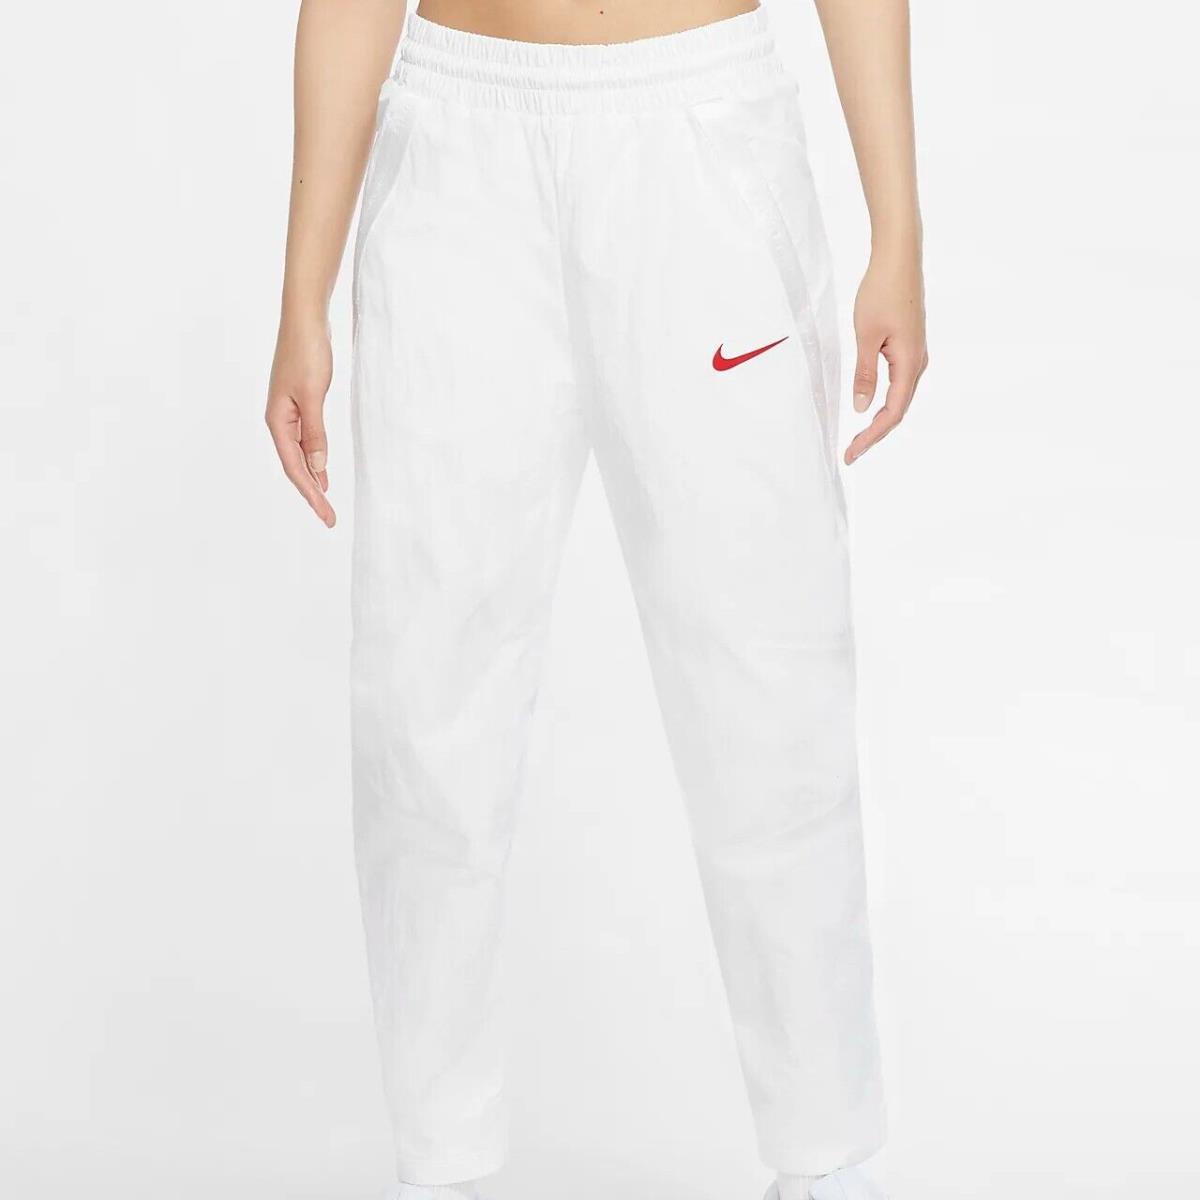 Nike Women`s Team Usa Medal Stand Pants CK4620-100 Size M